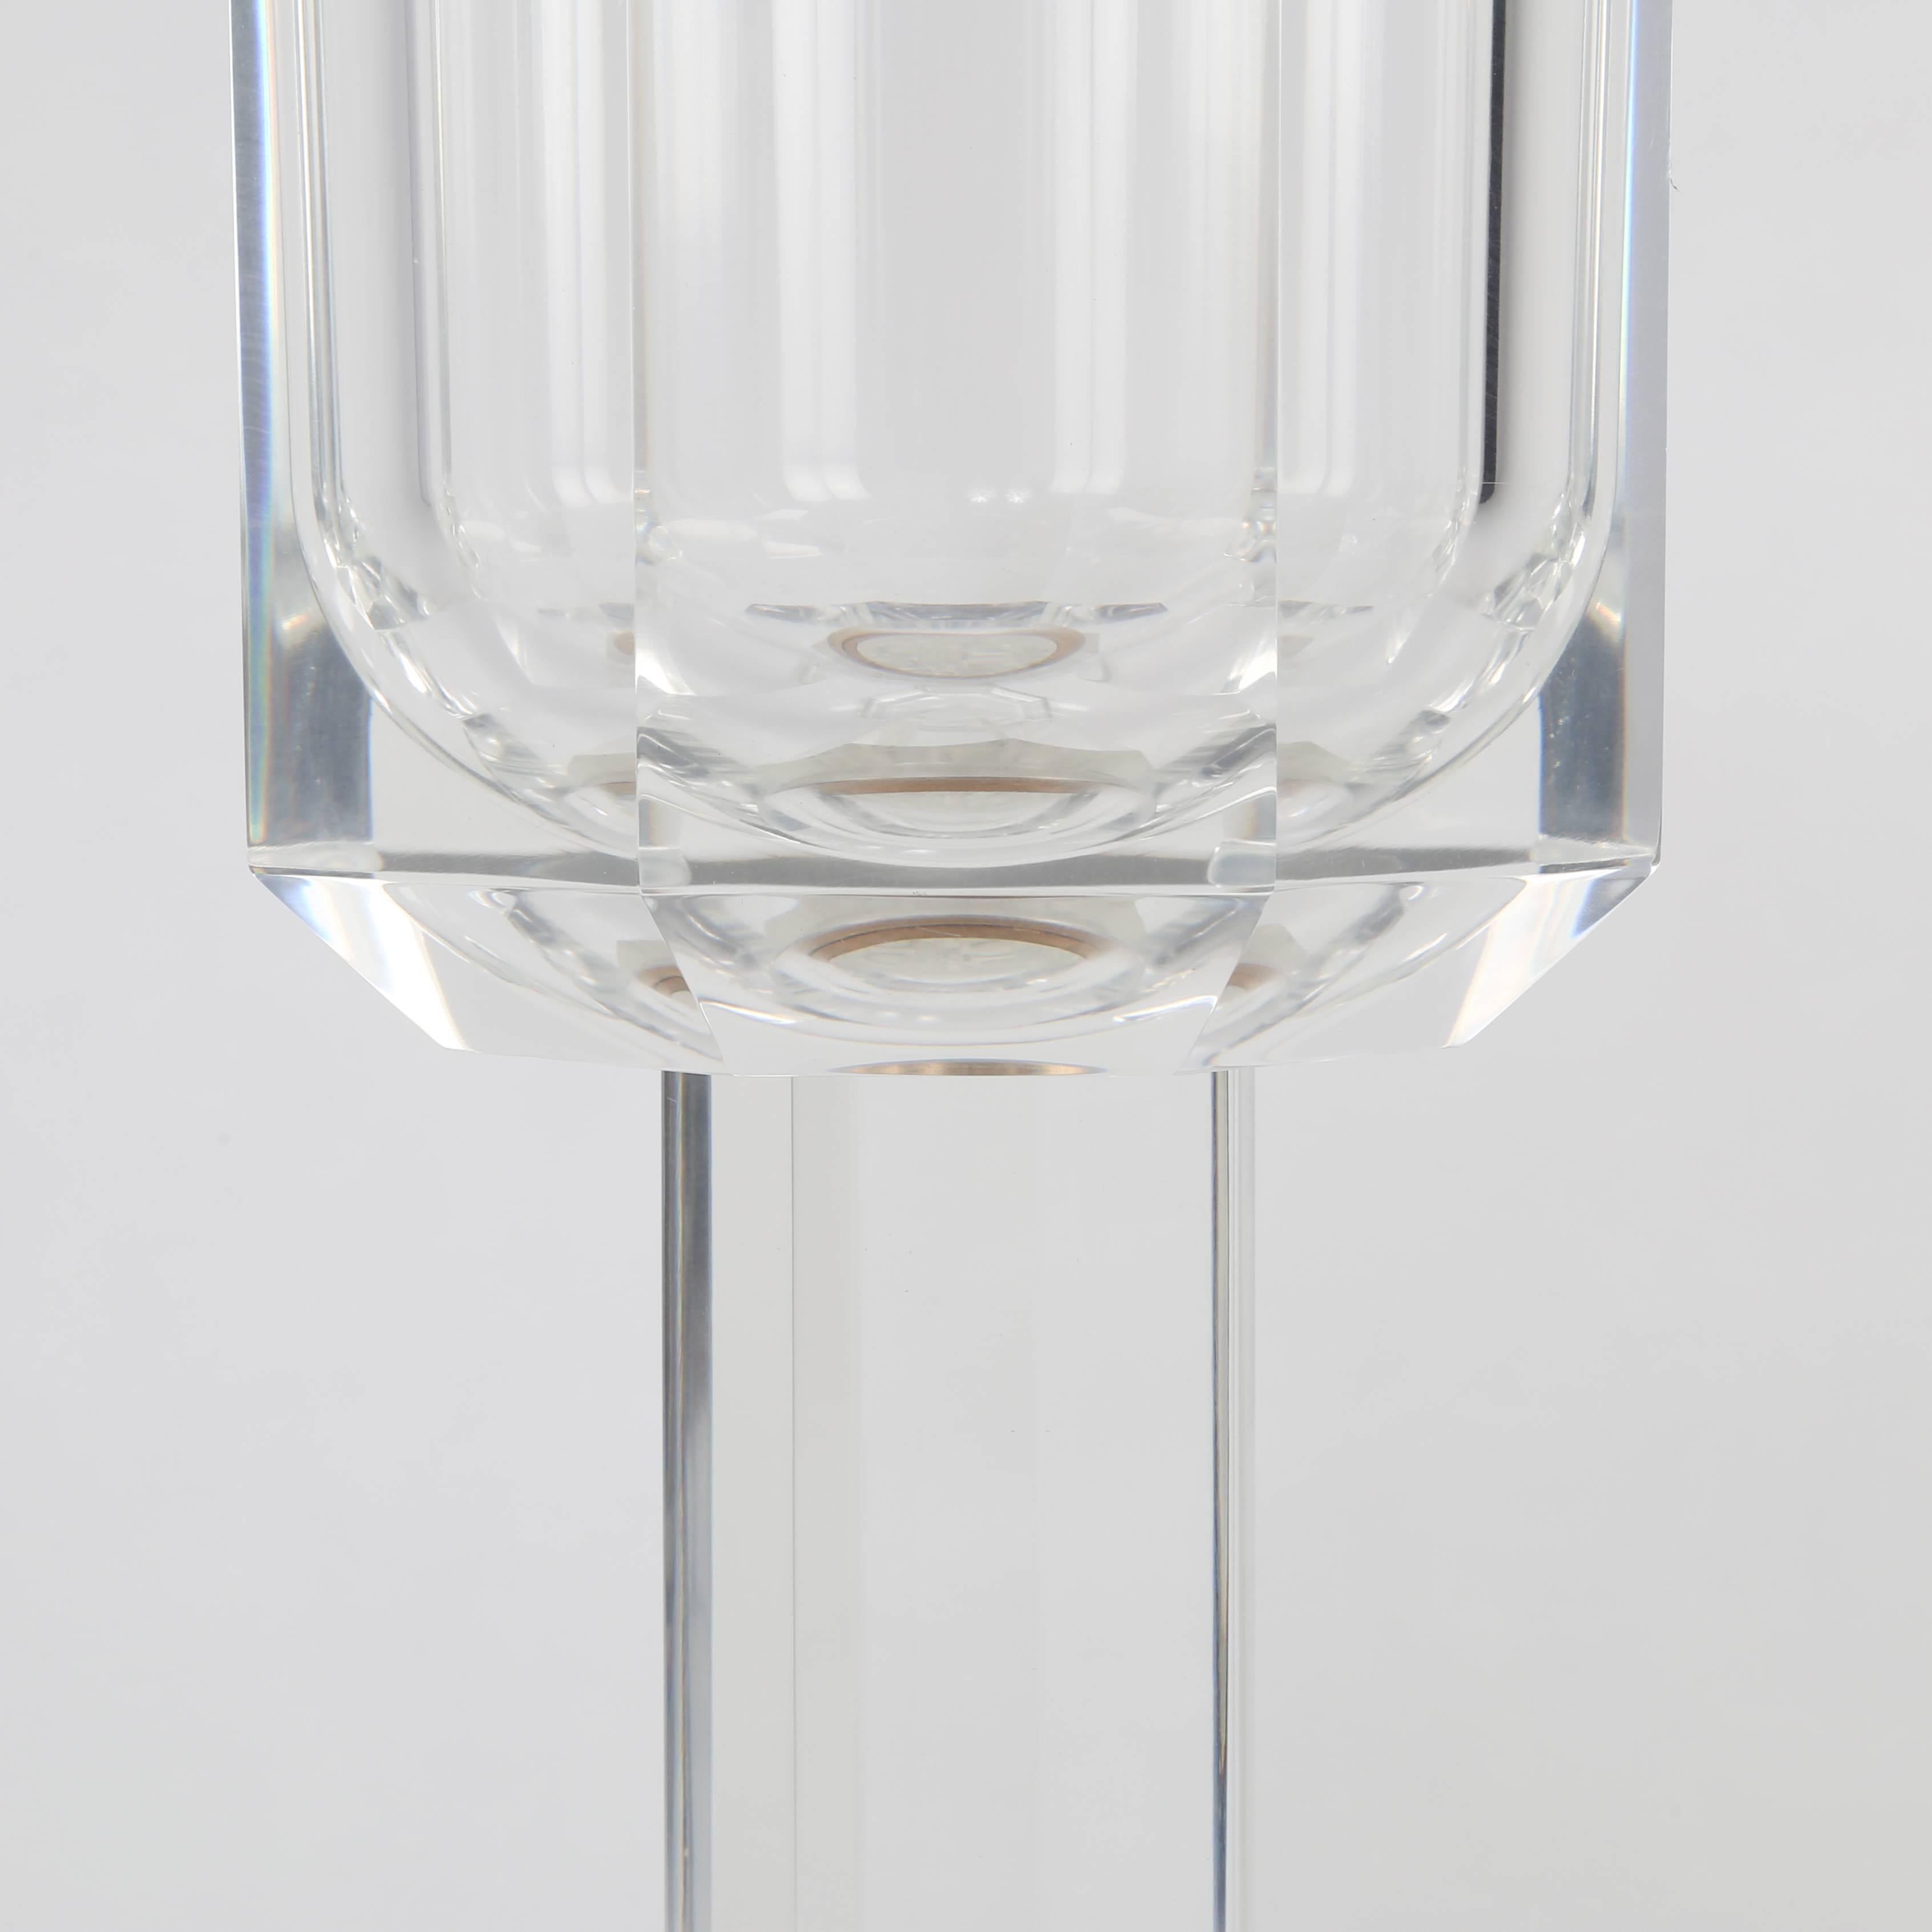 Late 20th Century Heavy Lucite Champagne Bucket on Stand, circa 1970s